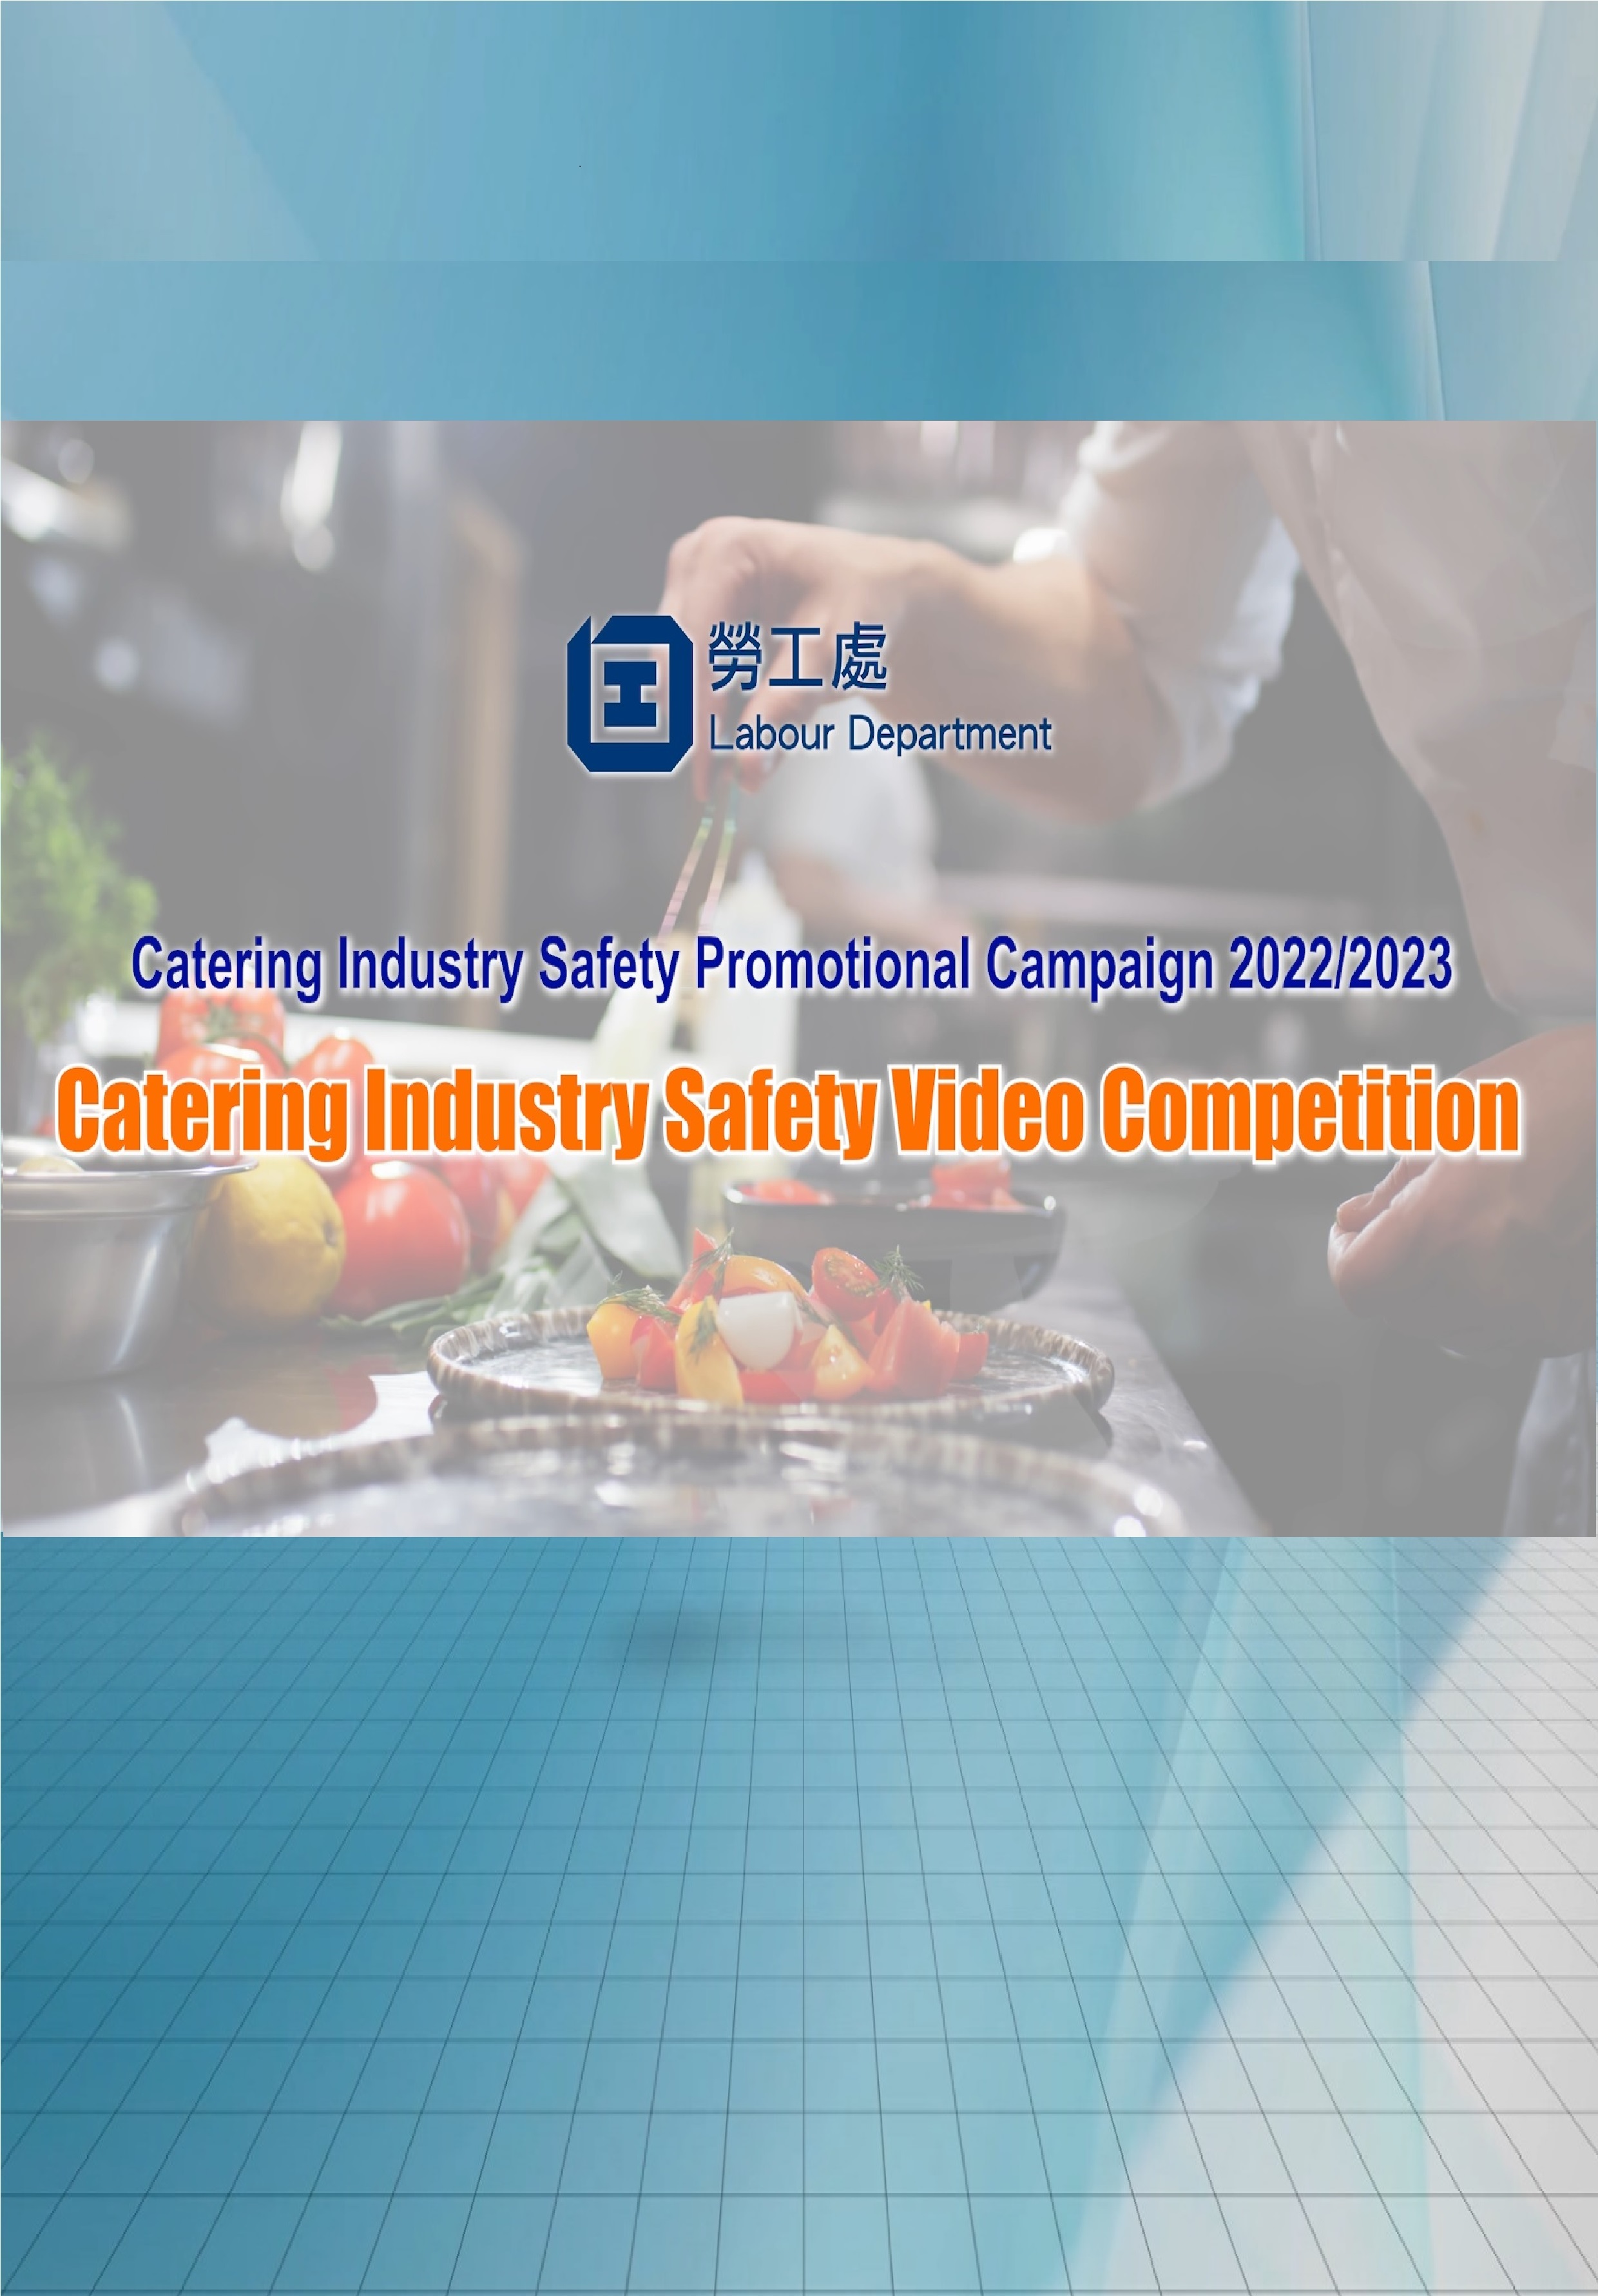 The Catering Industry Safety Video Competition of the Catering Industry Safety Promotional Campaign (2022/2023) was fully completed. Welcome to watch the highlights of the champions’ videos.